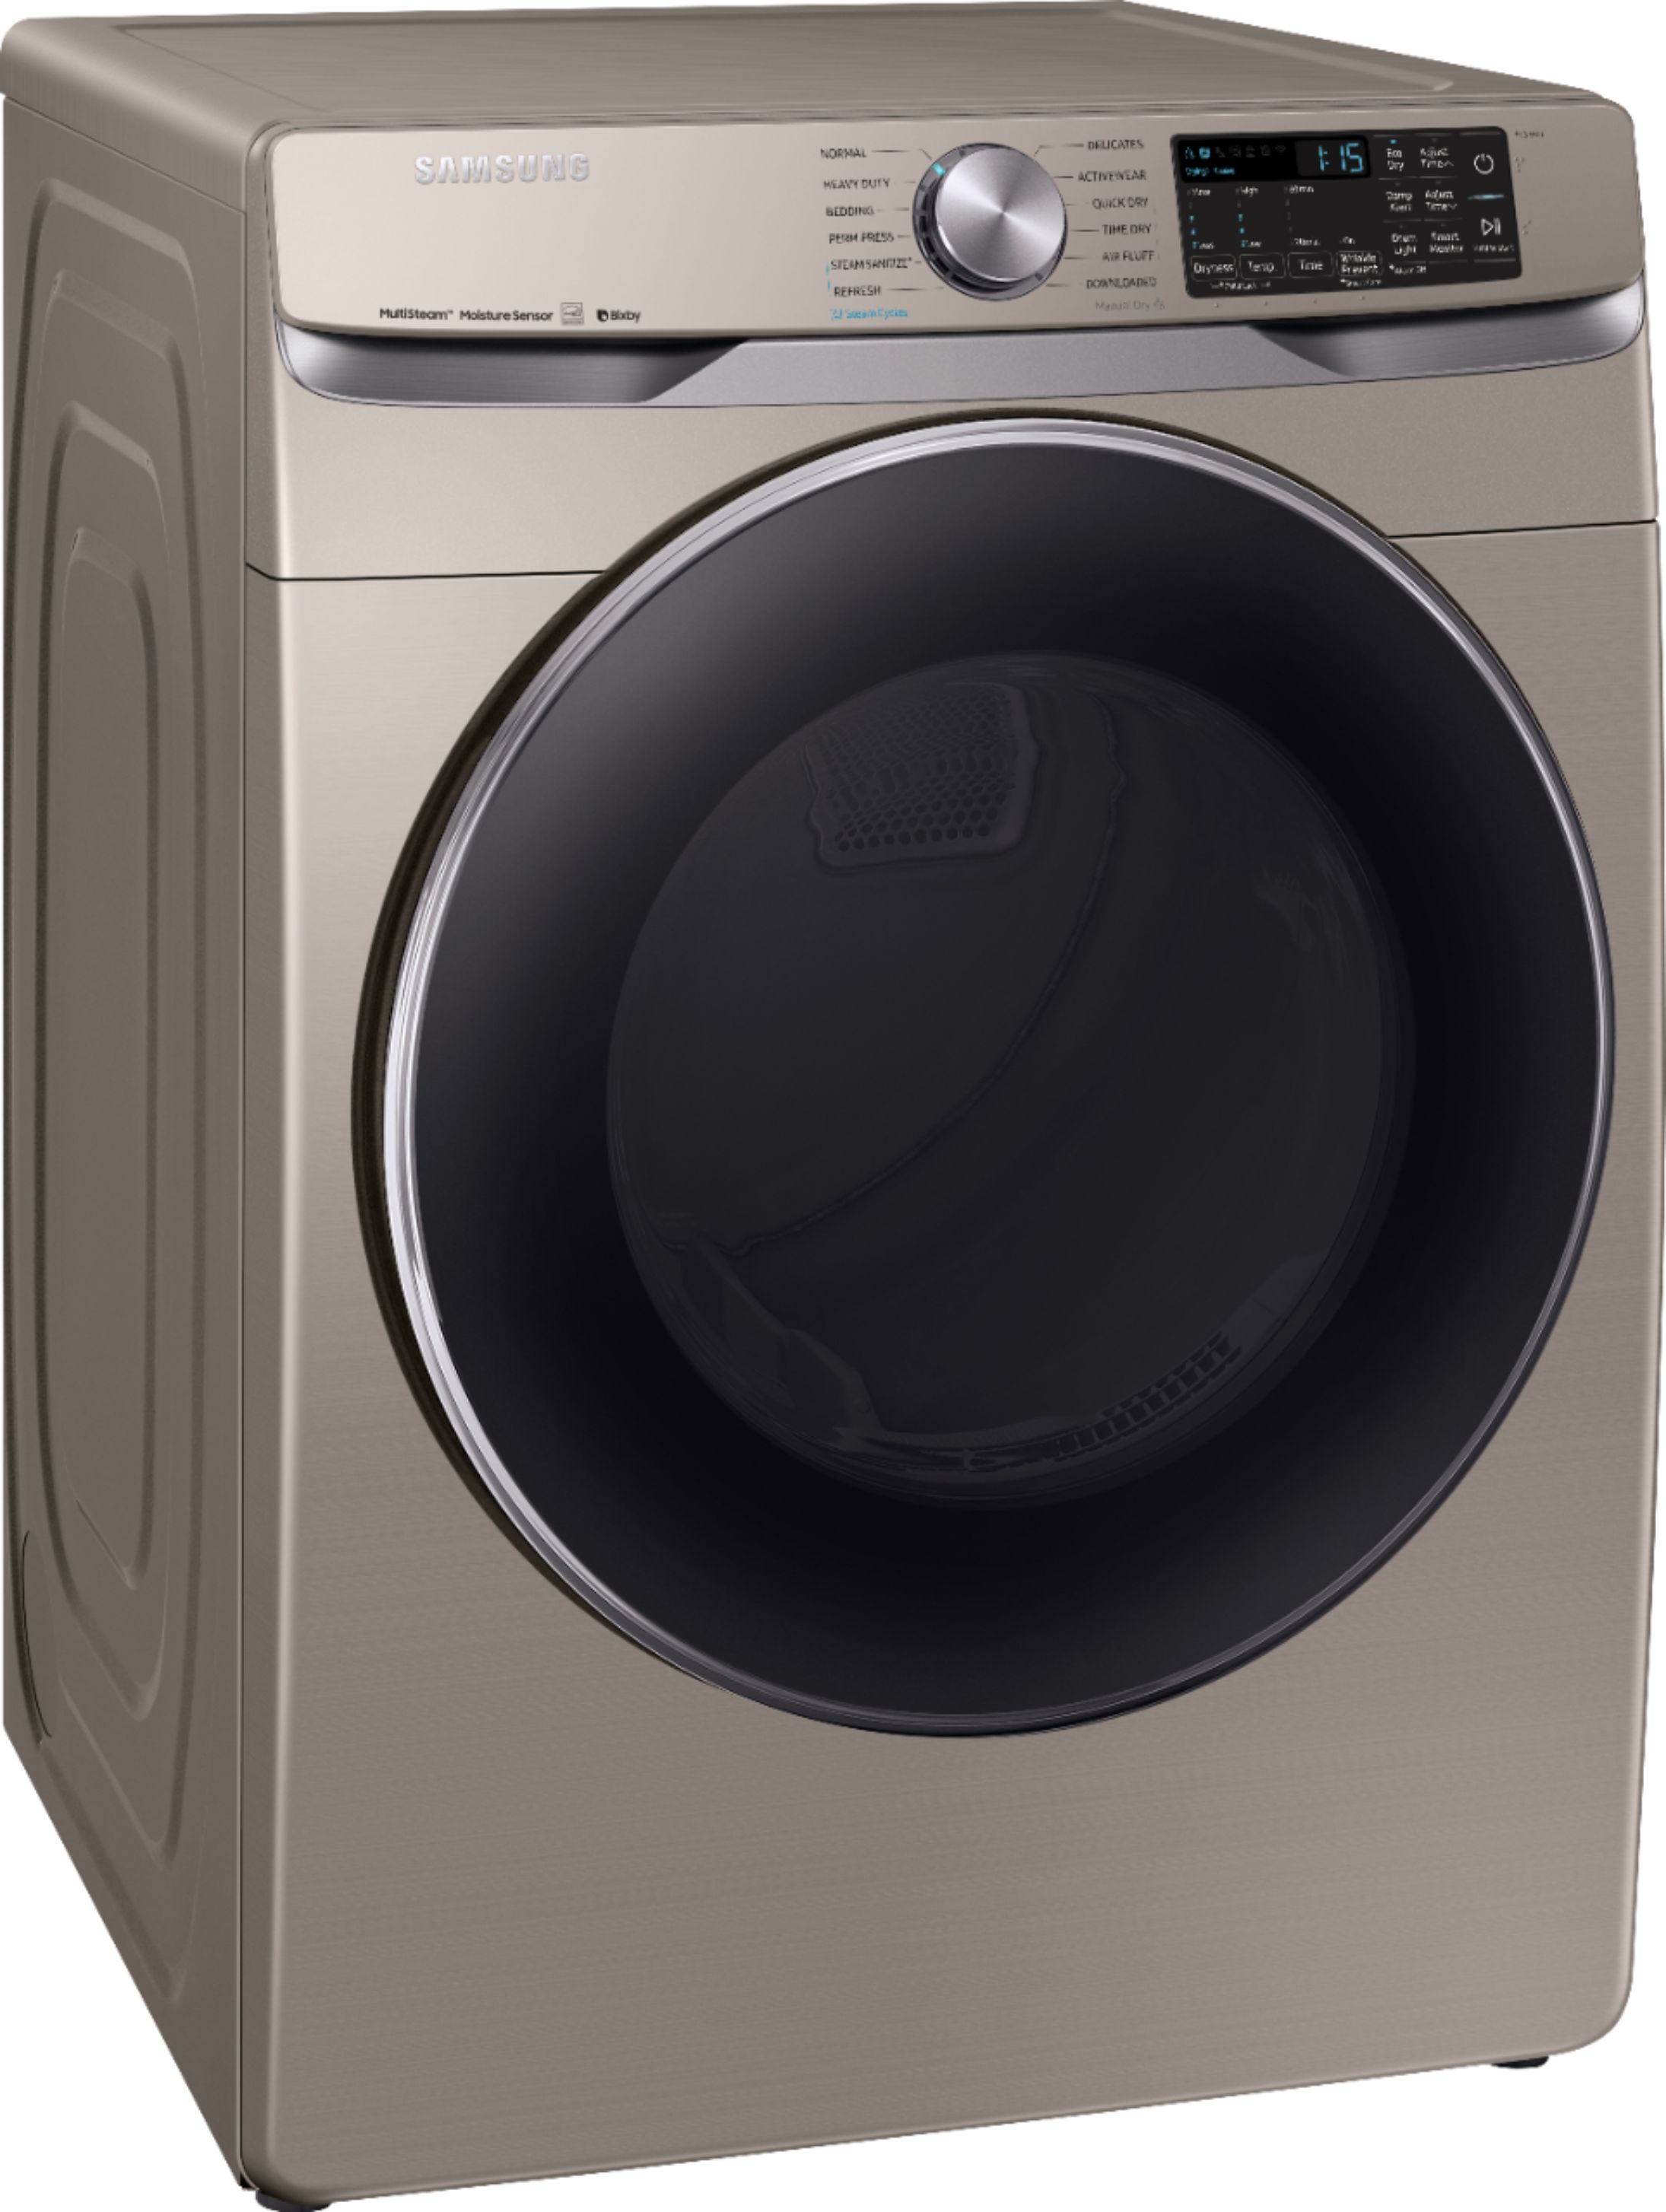 Angle View: Samsung - 7.5 Cu. Ft. Stackable Smart Gas Dryer with Steam and Sensor Dry - Champagne